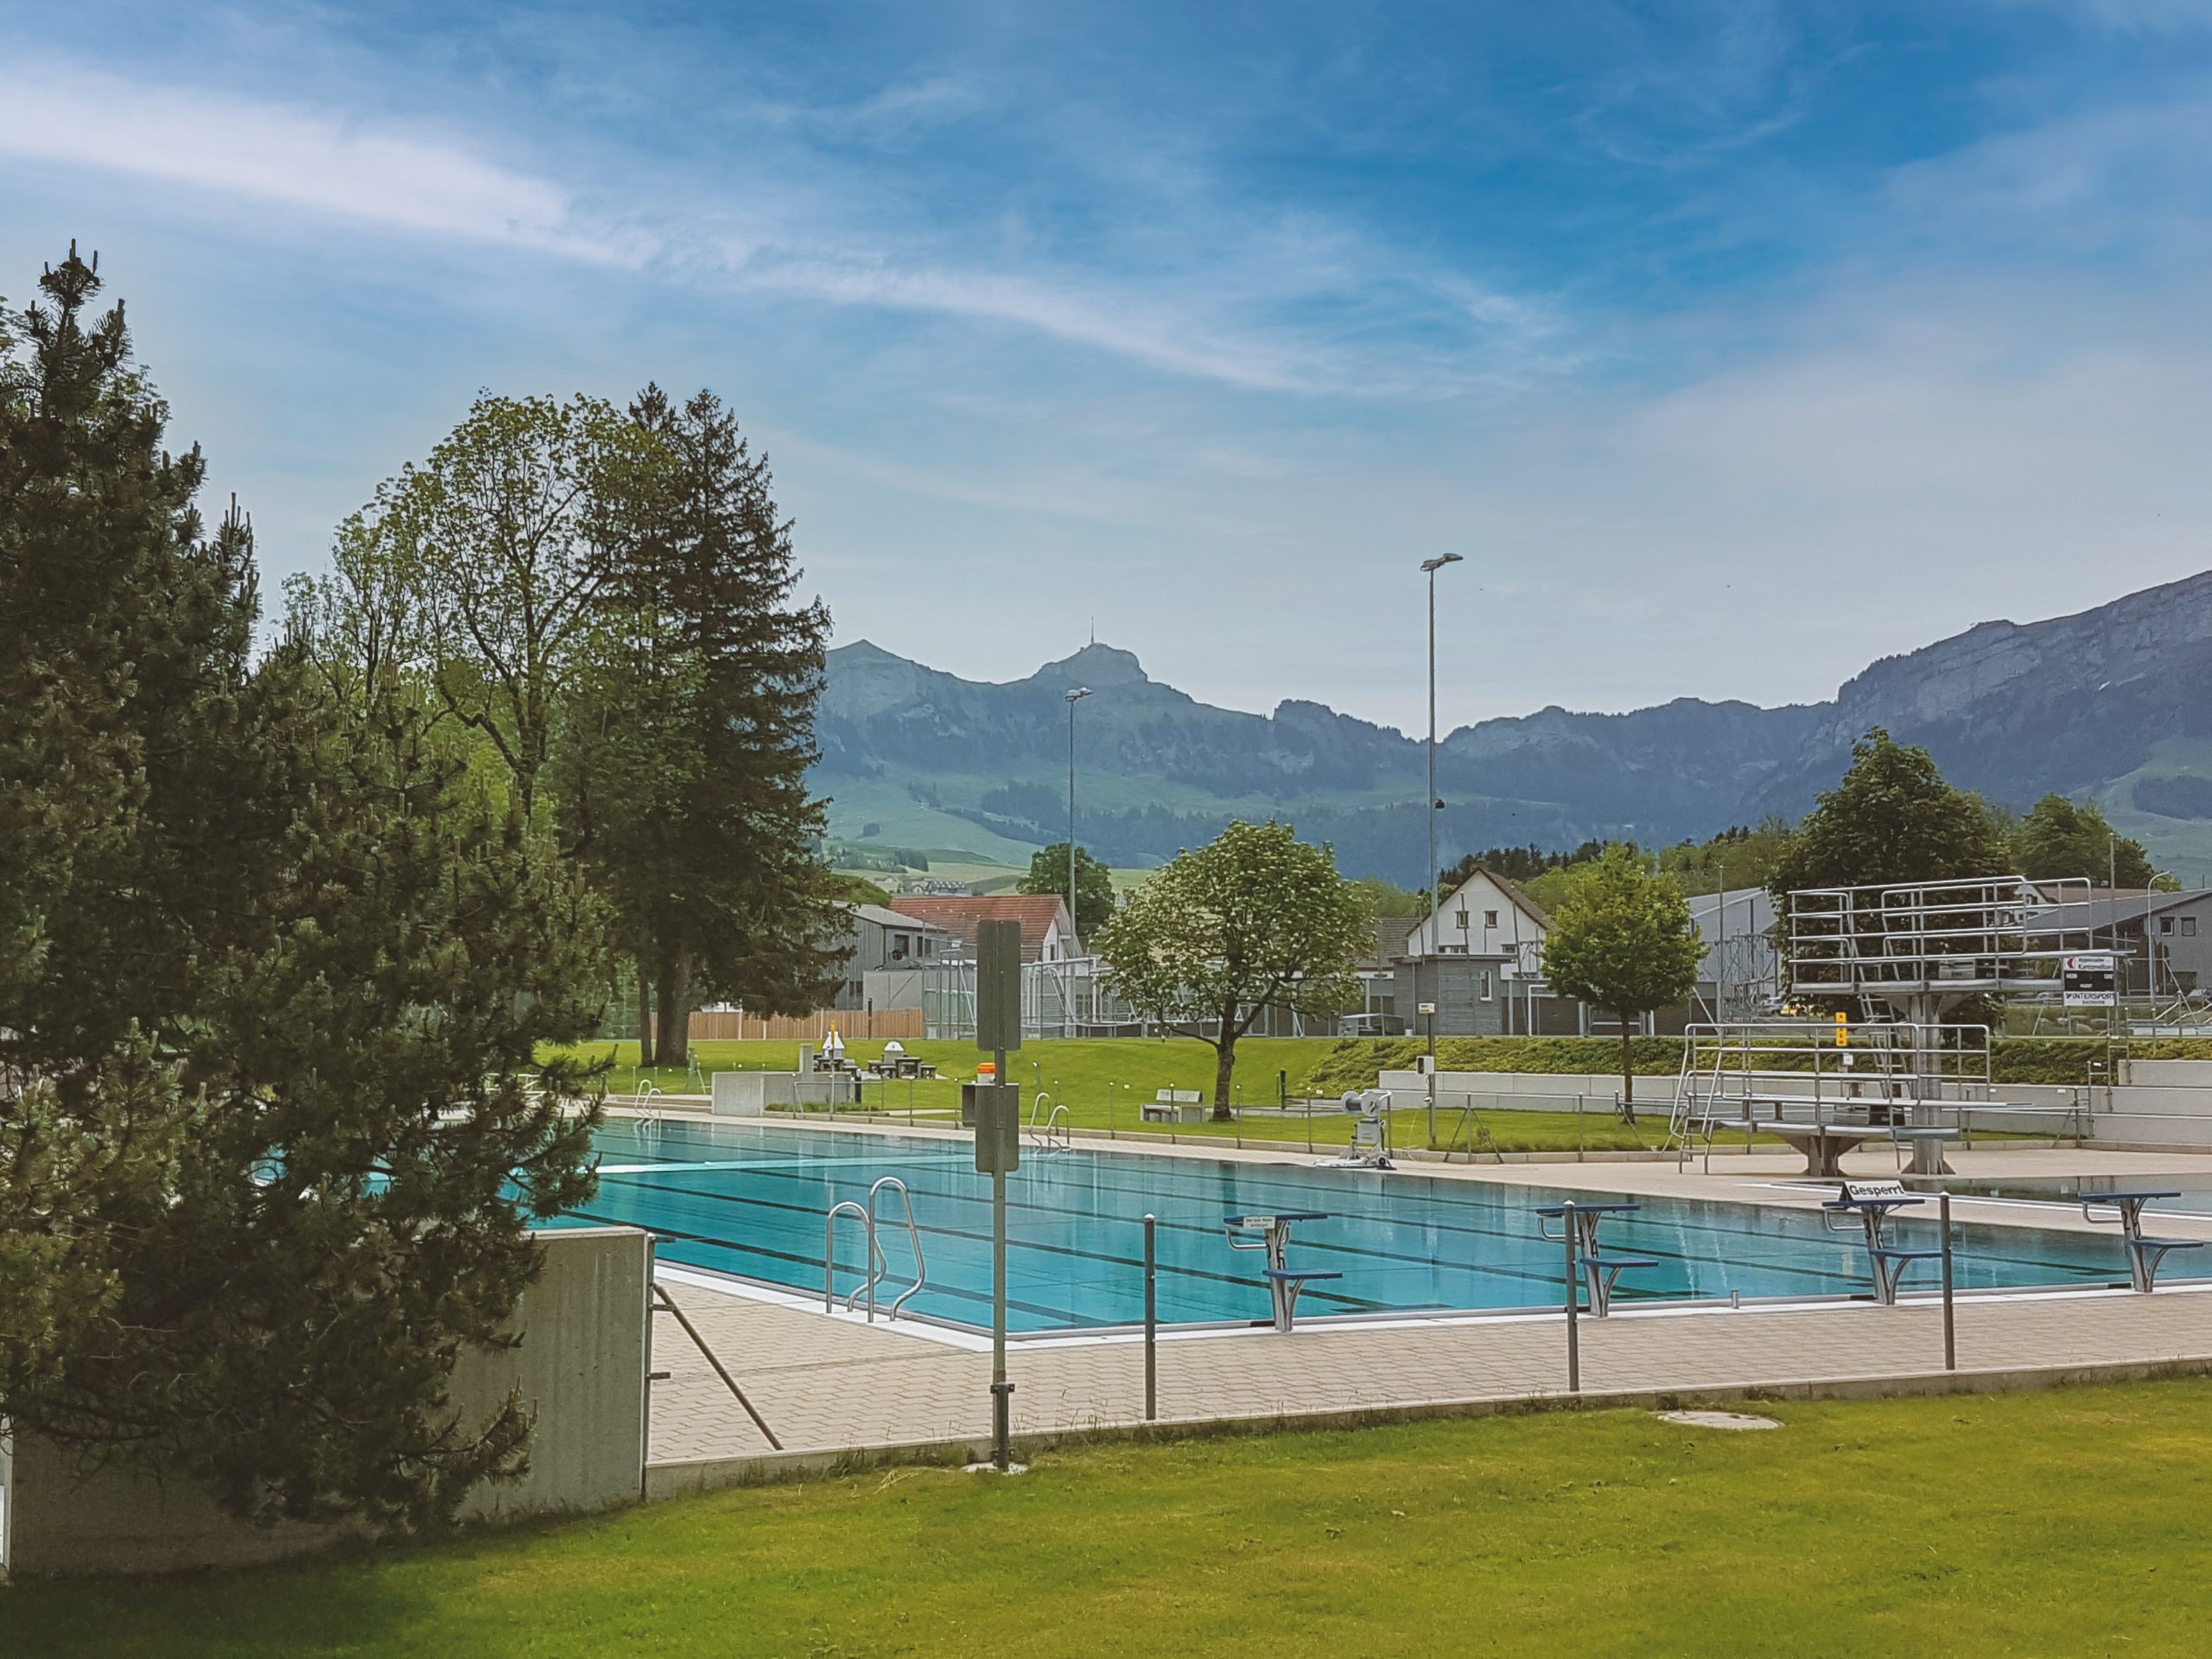 (c) Freibad-appenzell.ch